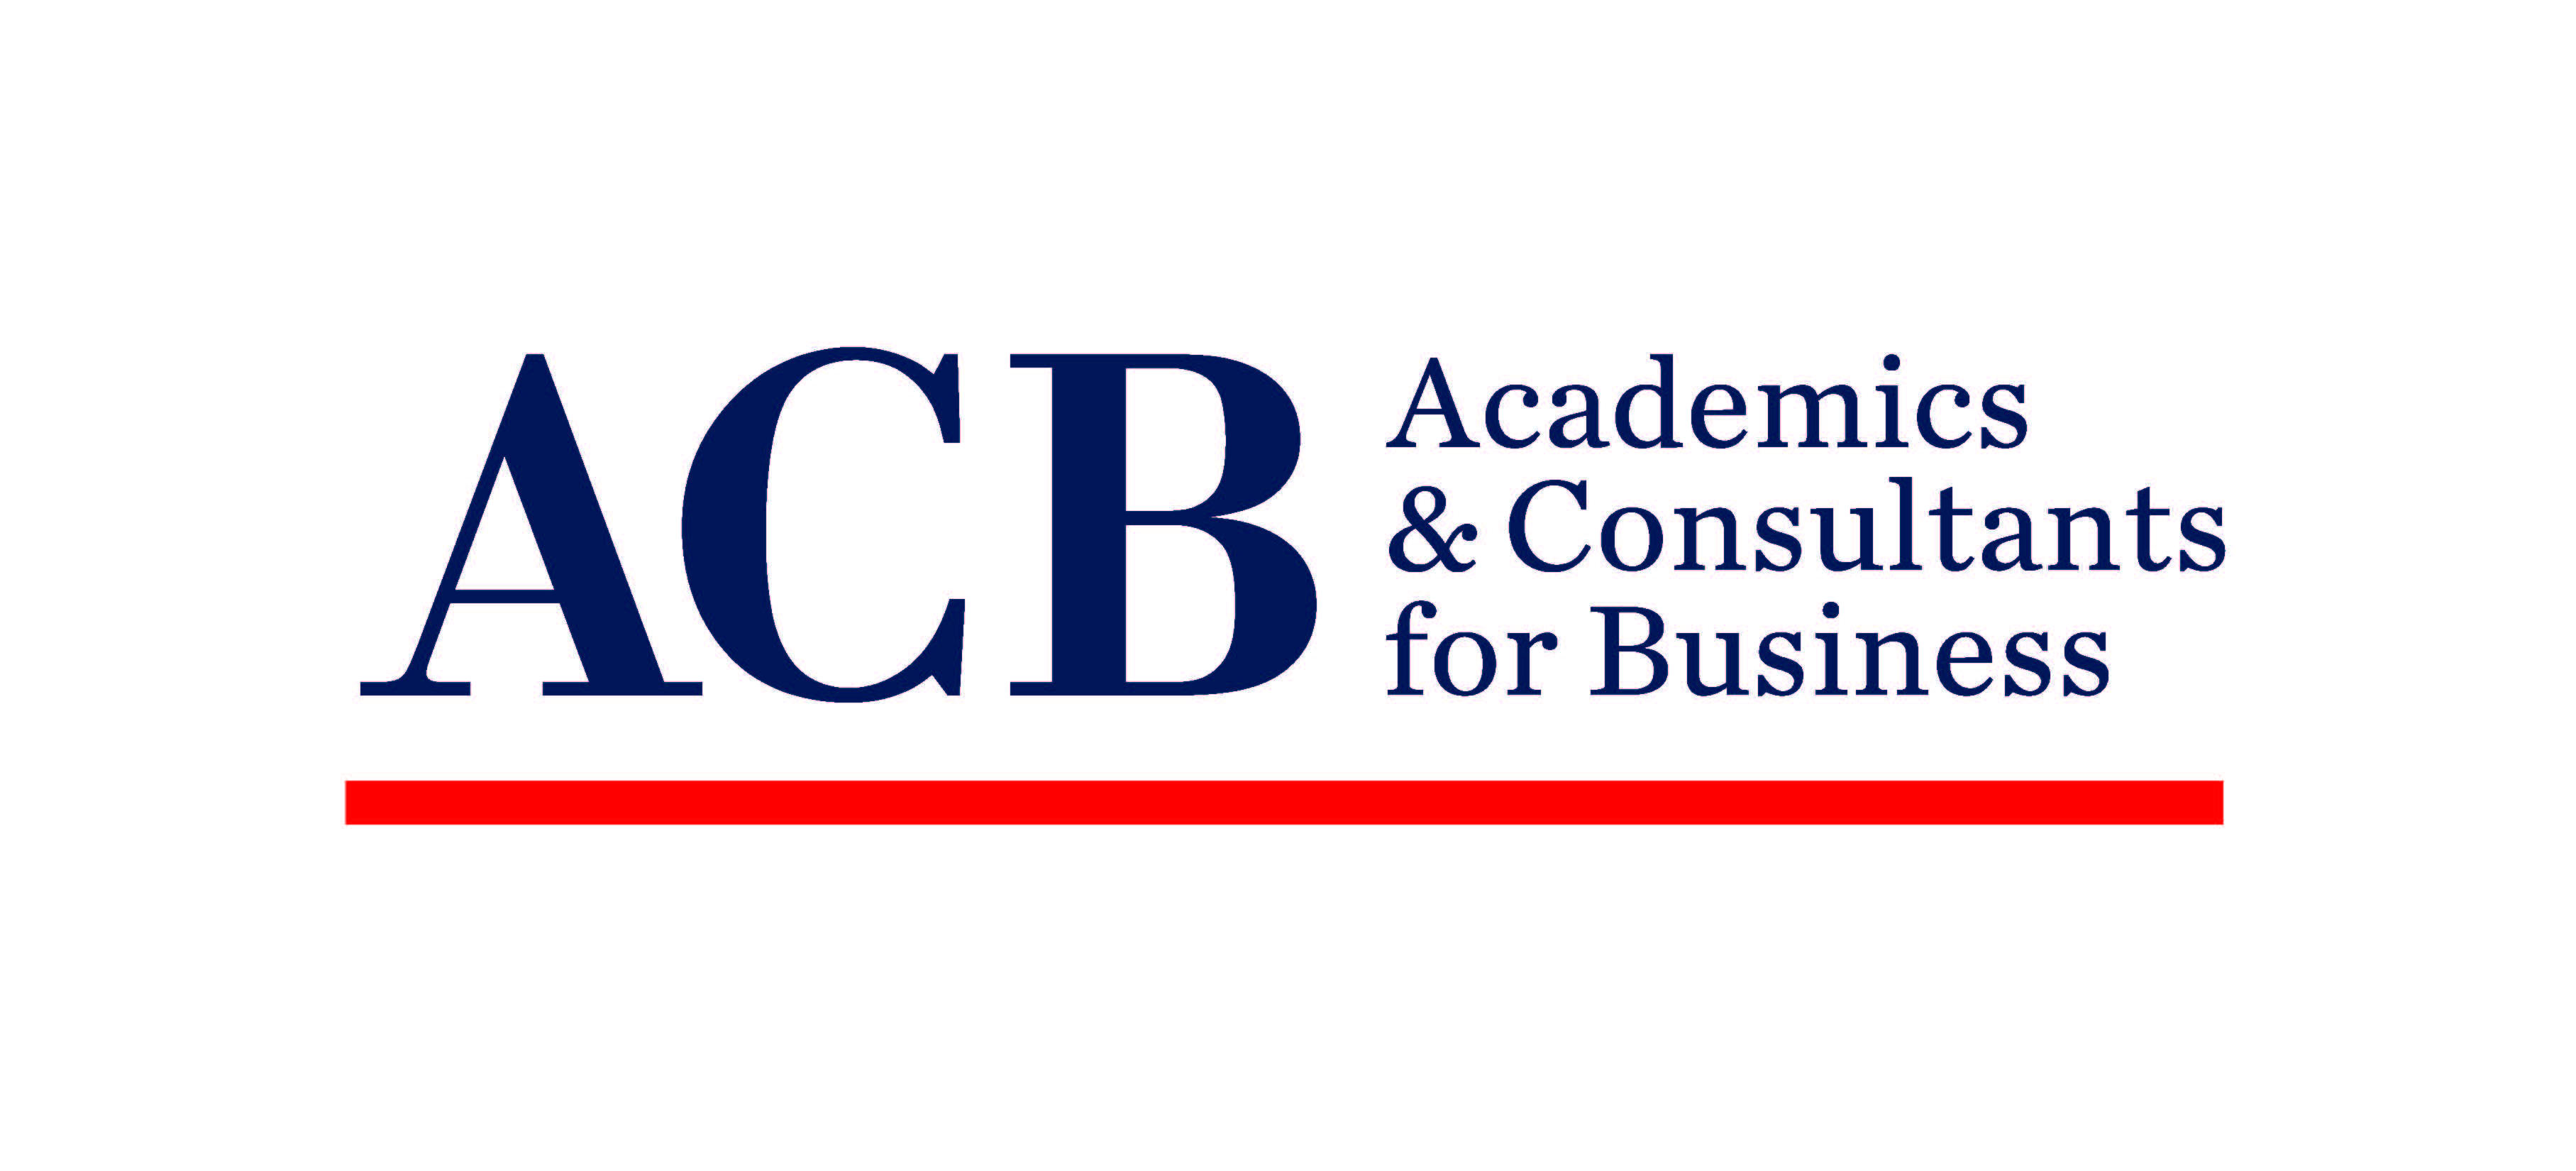 ACB Academics & Consultants for Business